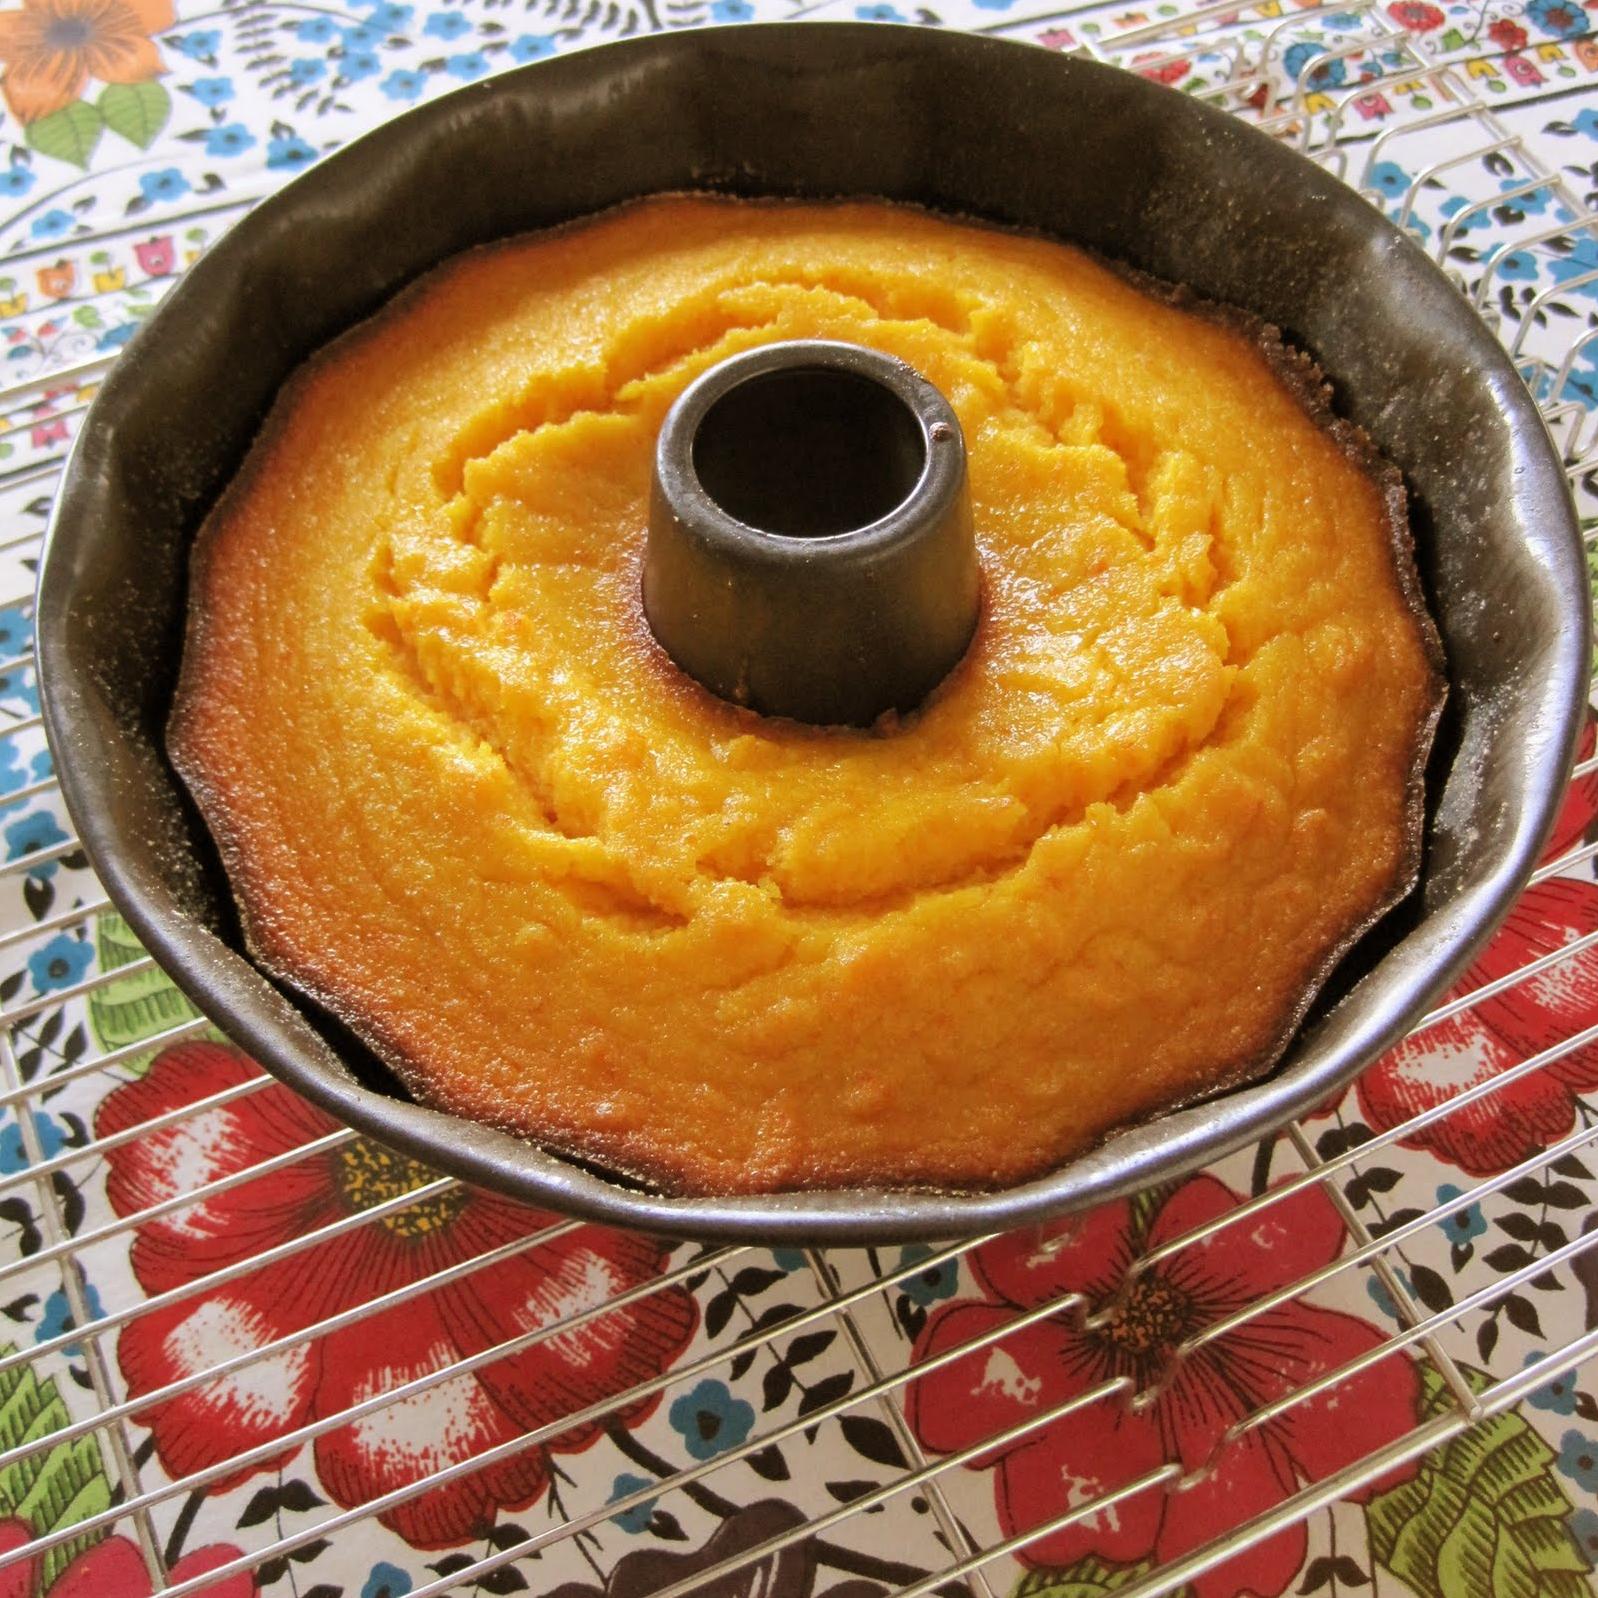  A classic dessert elevated to a gluten-free gem – that's what this corn cake is all about!